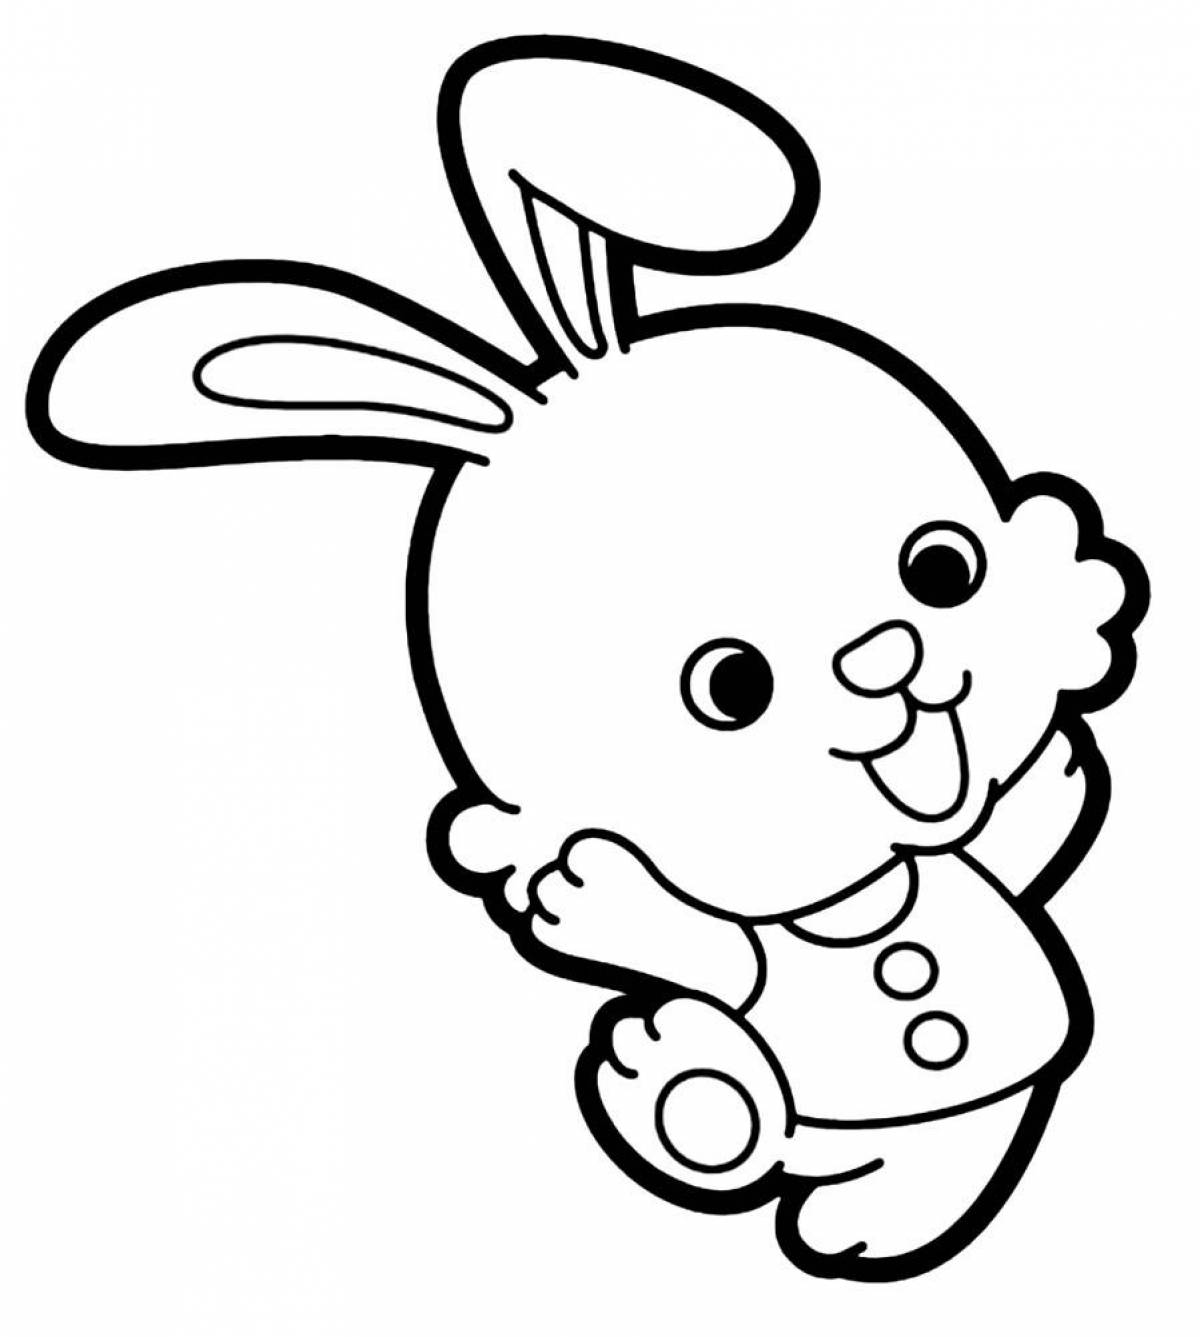 Snuggly coloring page bunny